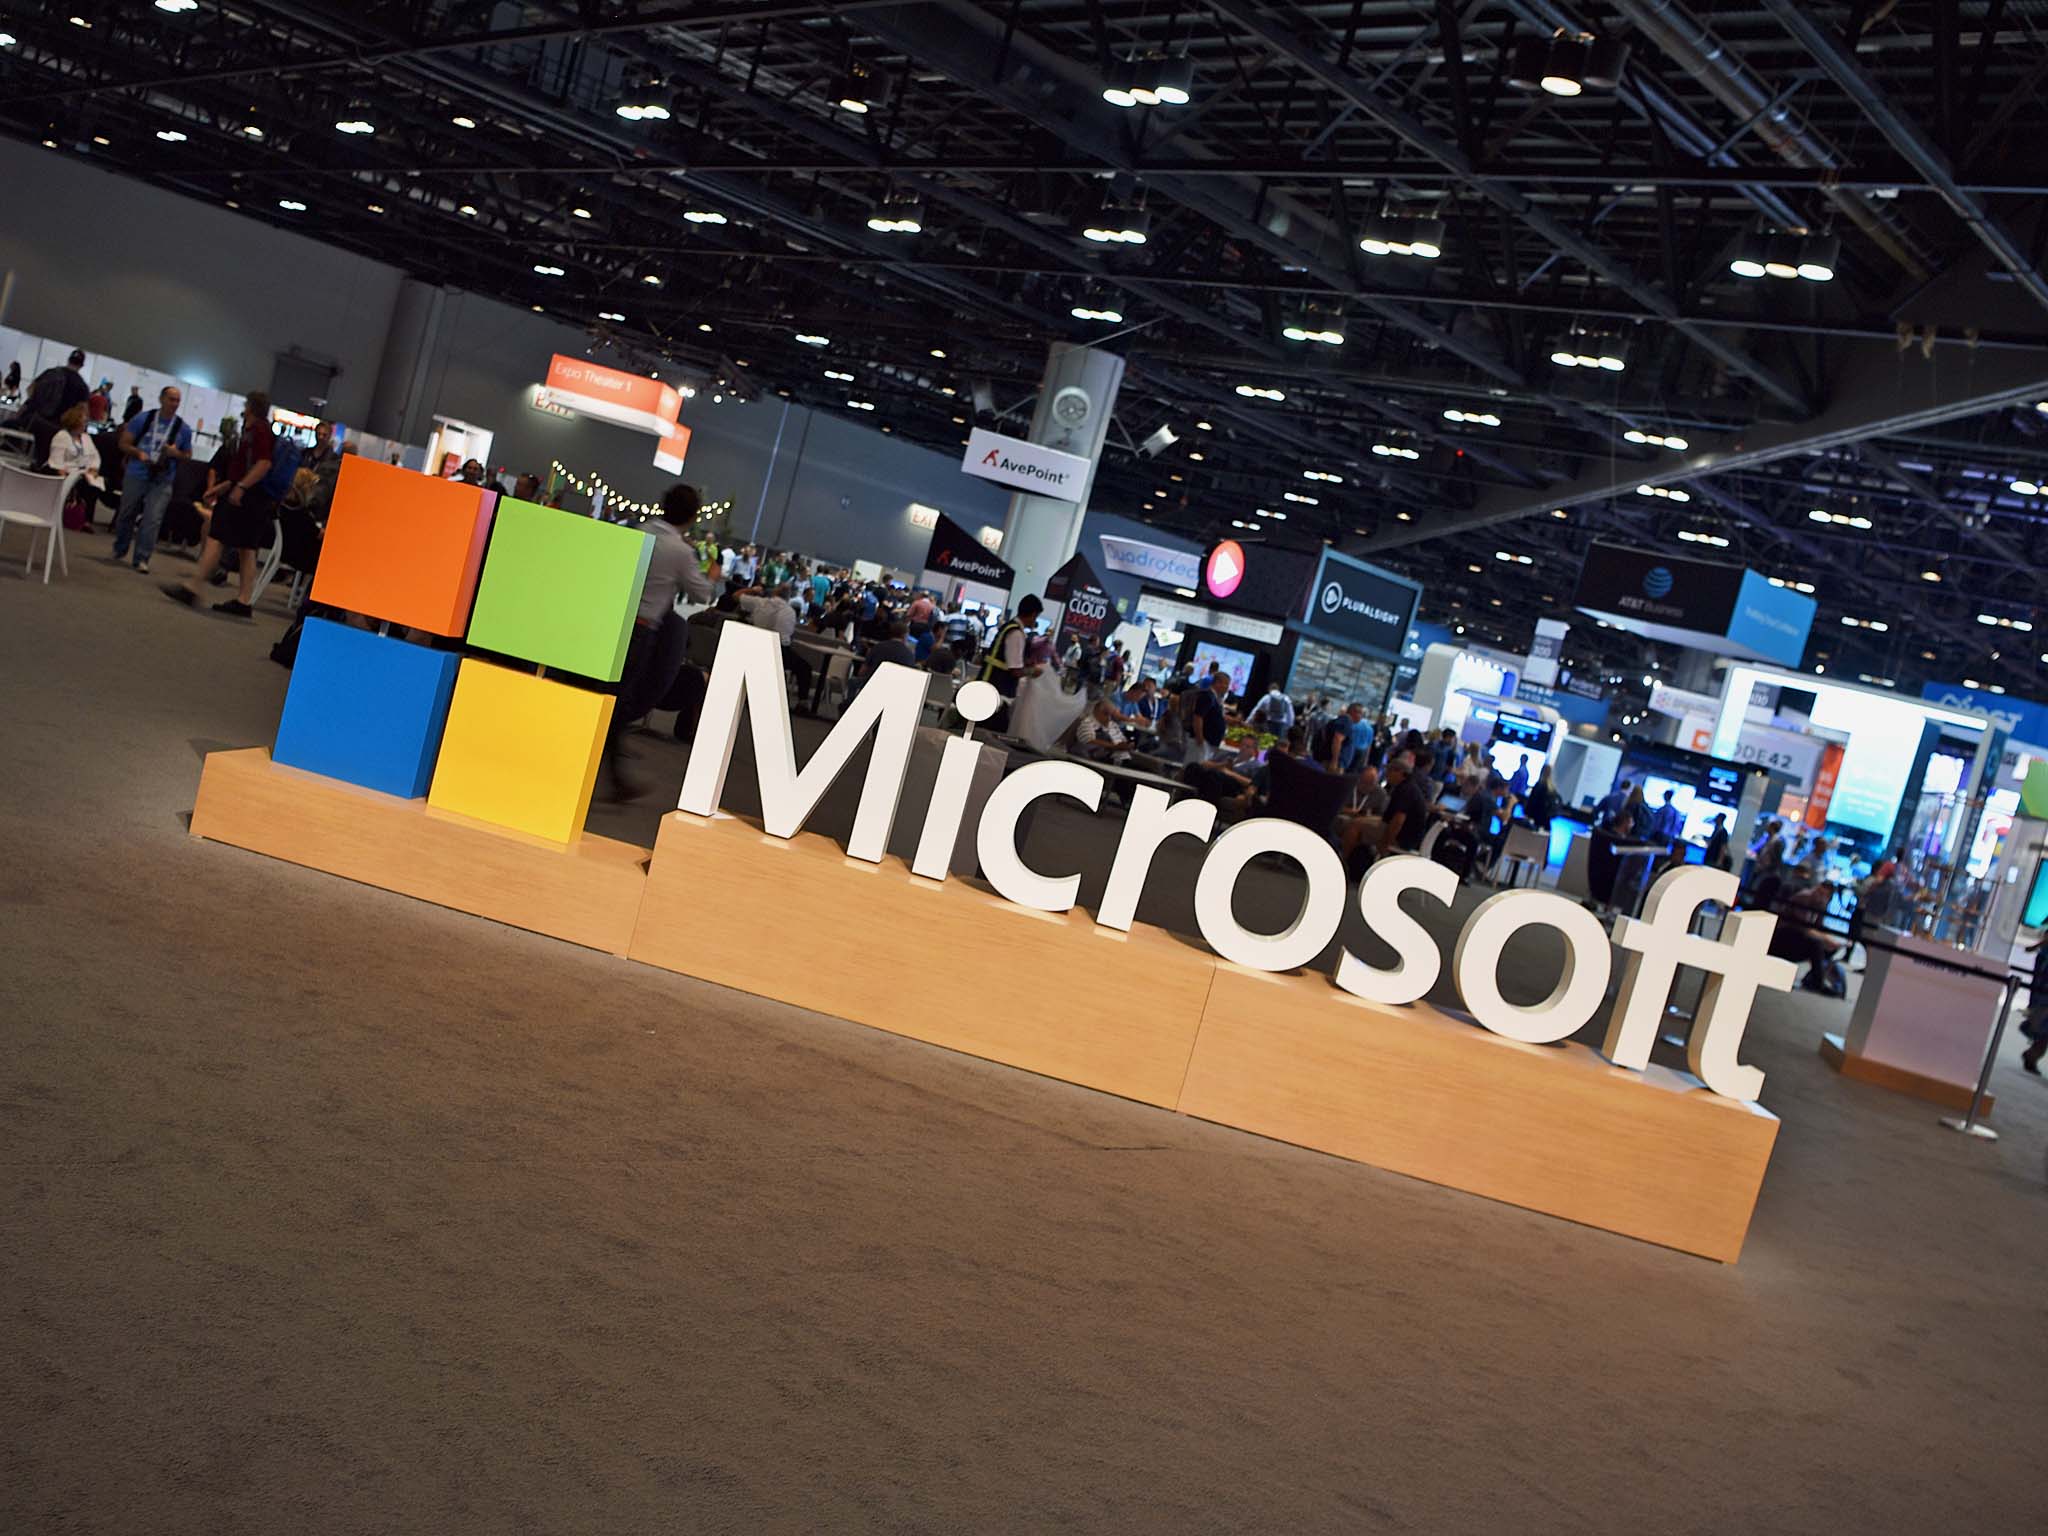 Microsoft reportedly opening new datacenters in Germany